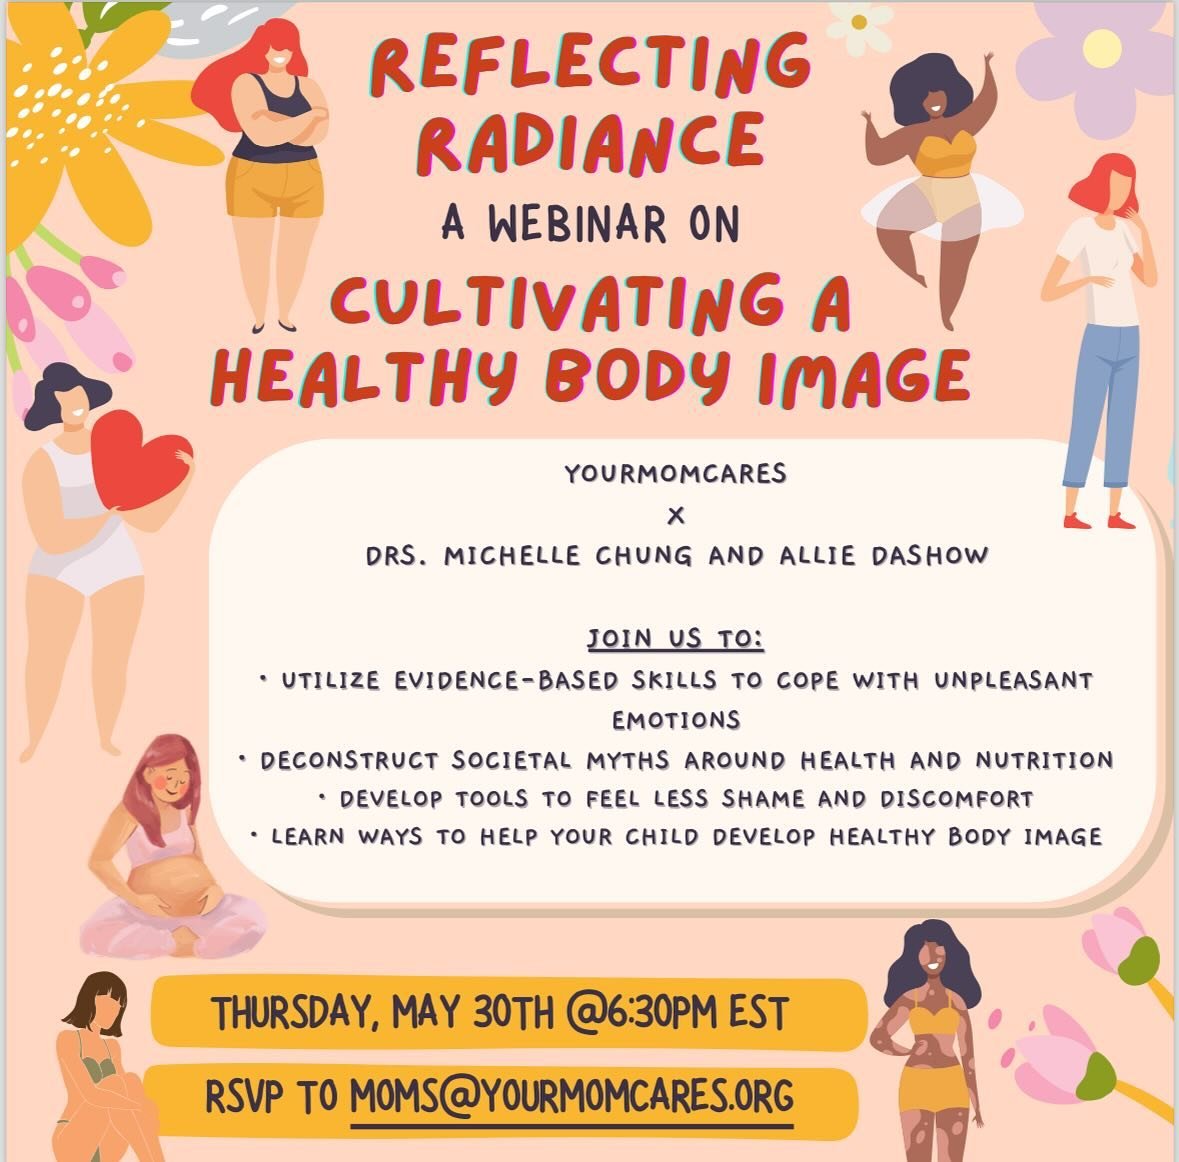 Join us on May 30th and meet Dr. Dashow, a psychologist specializing in treating eating disorders, disordered eating, and body image issues. 

This webinar is tailored for individuals struggling with feelings of shame and discomfort around their appe